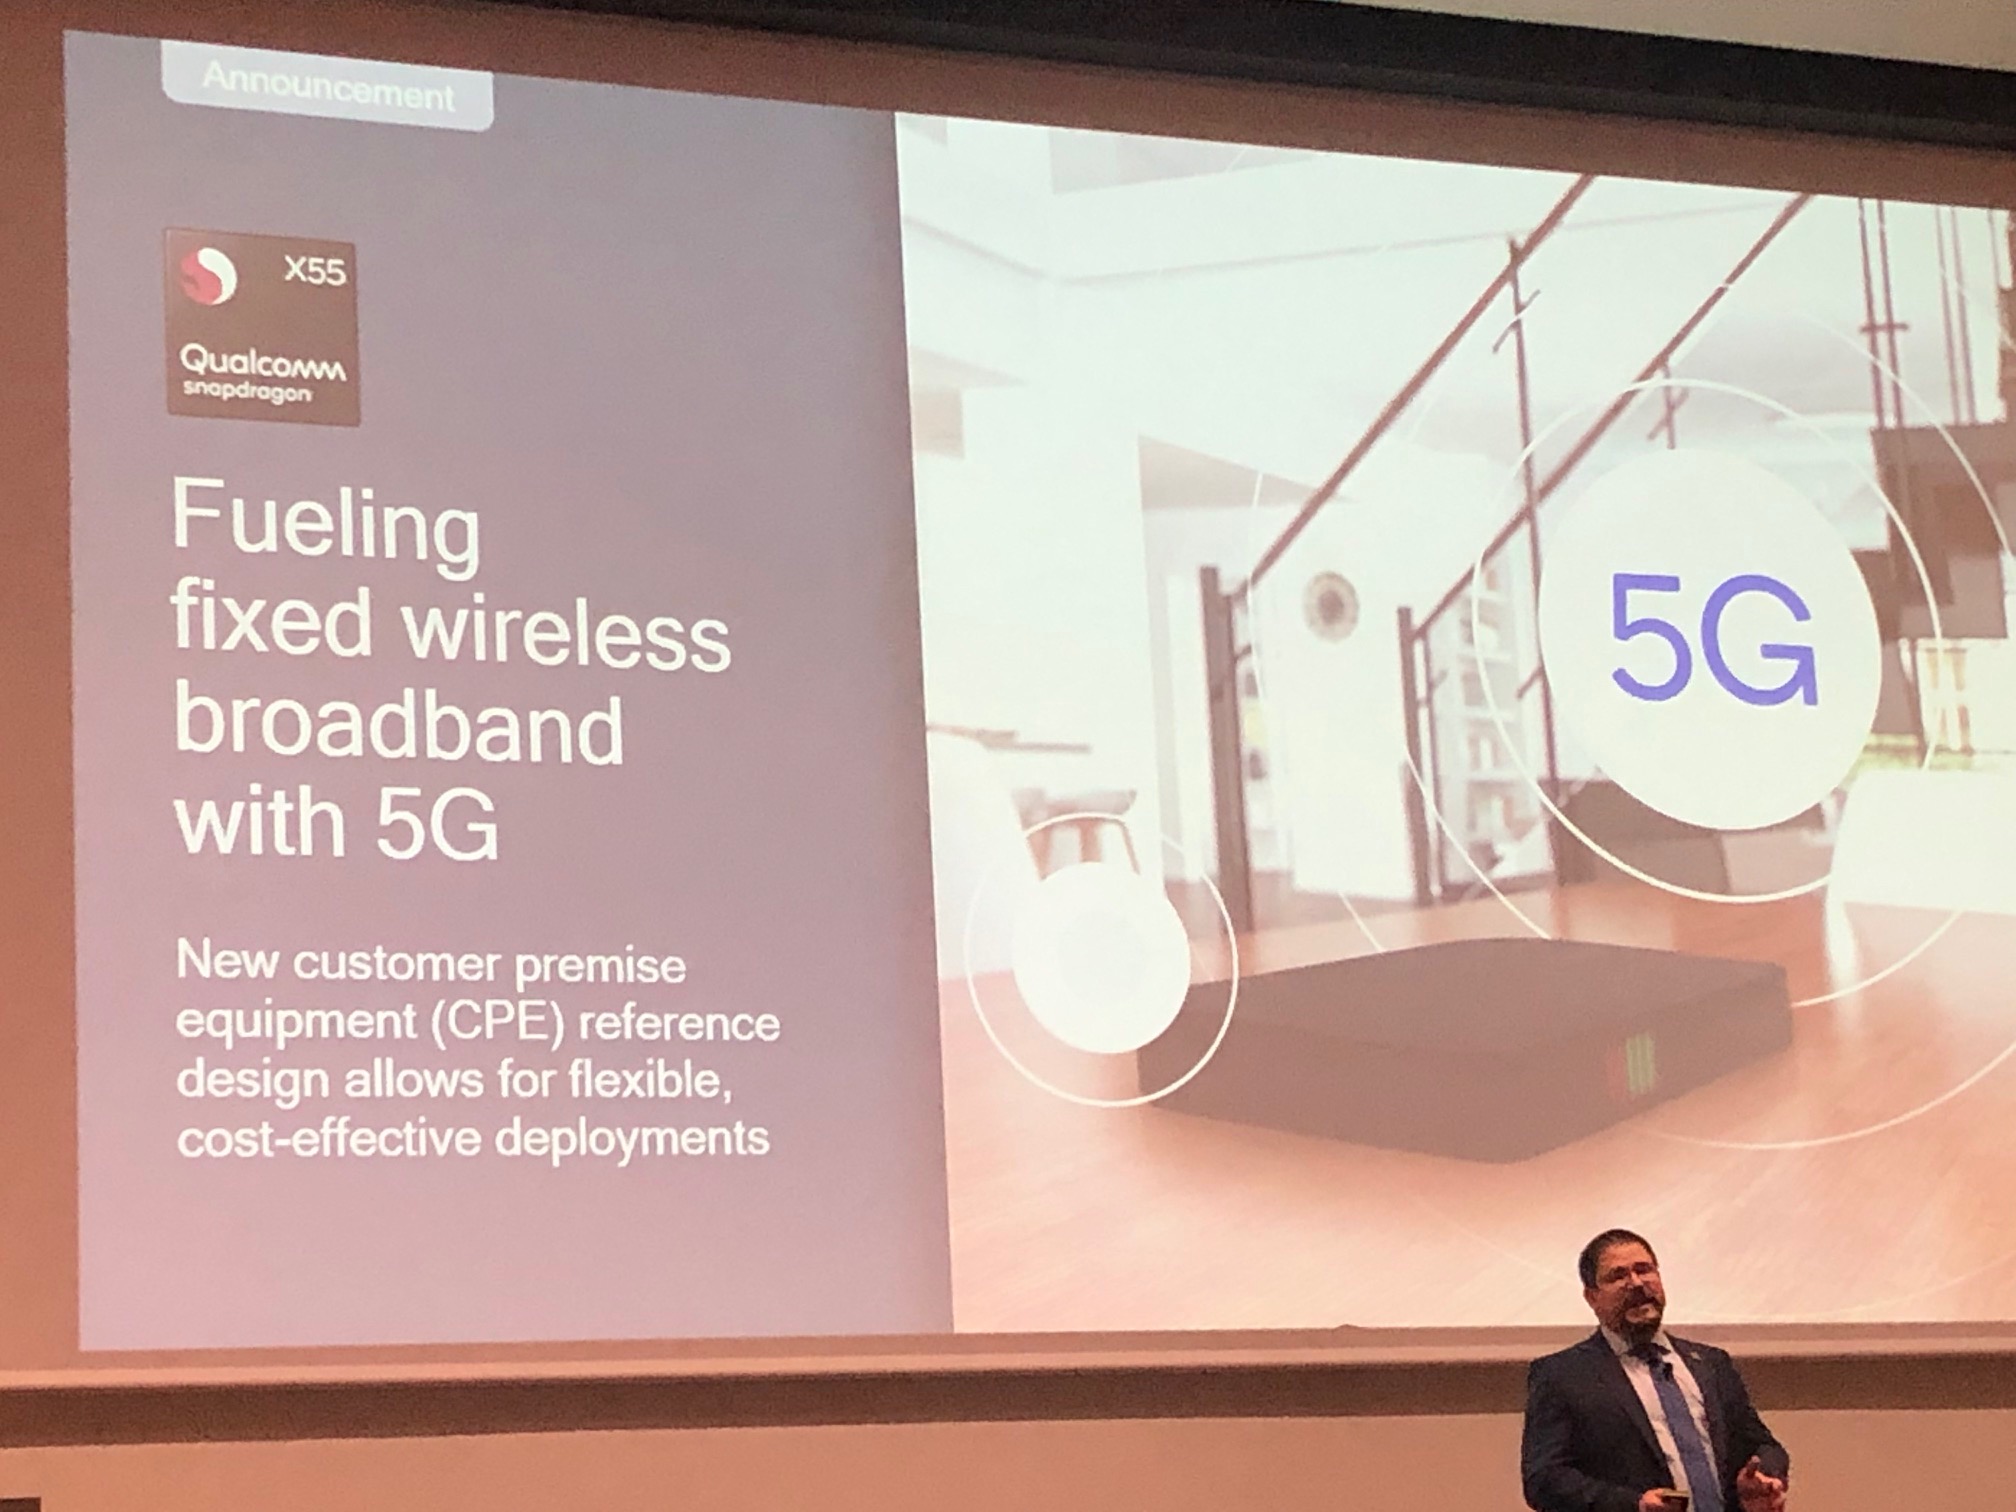 jammer nut grinder sandwich - Qualcomm Debuts CPE Reference Design for Fixed Wireless 5G Broadband